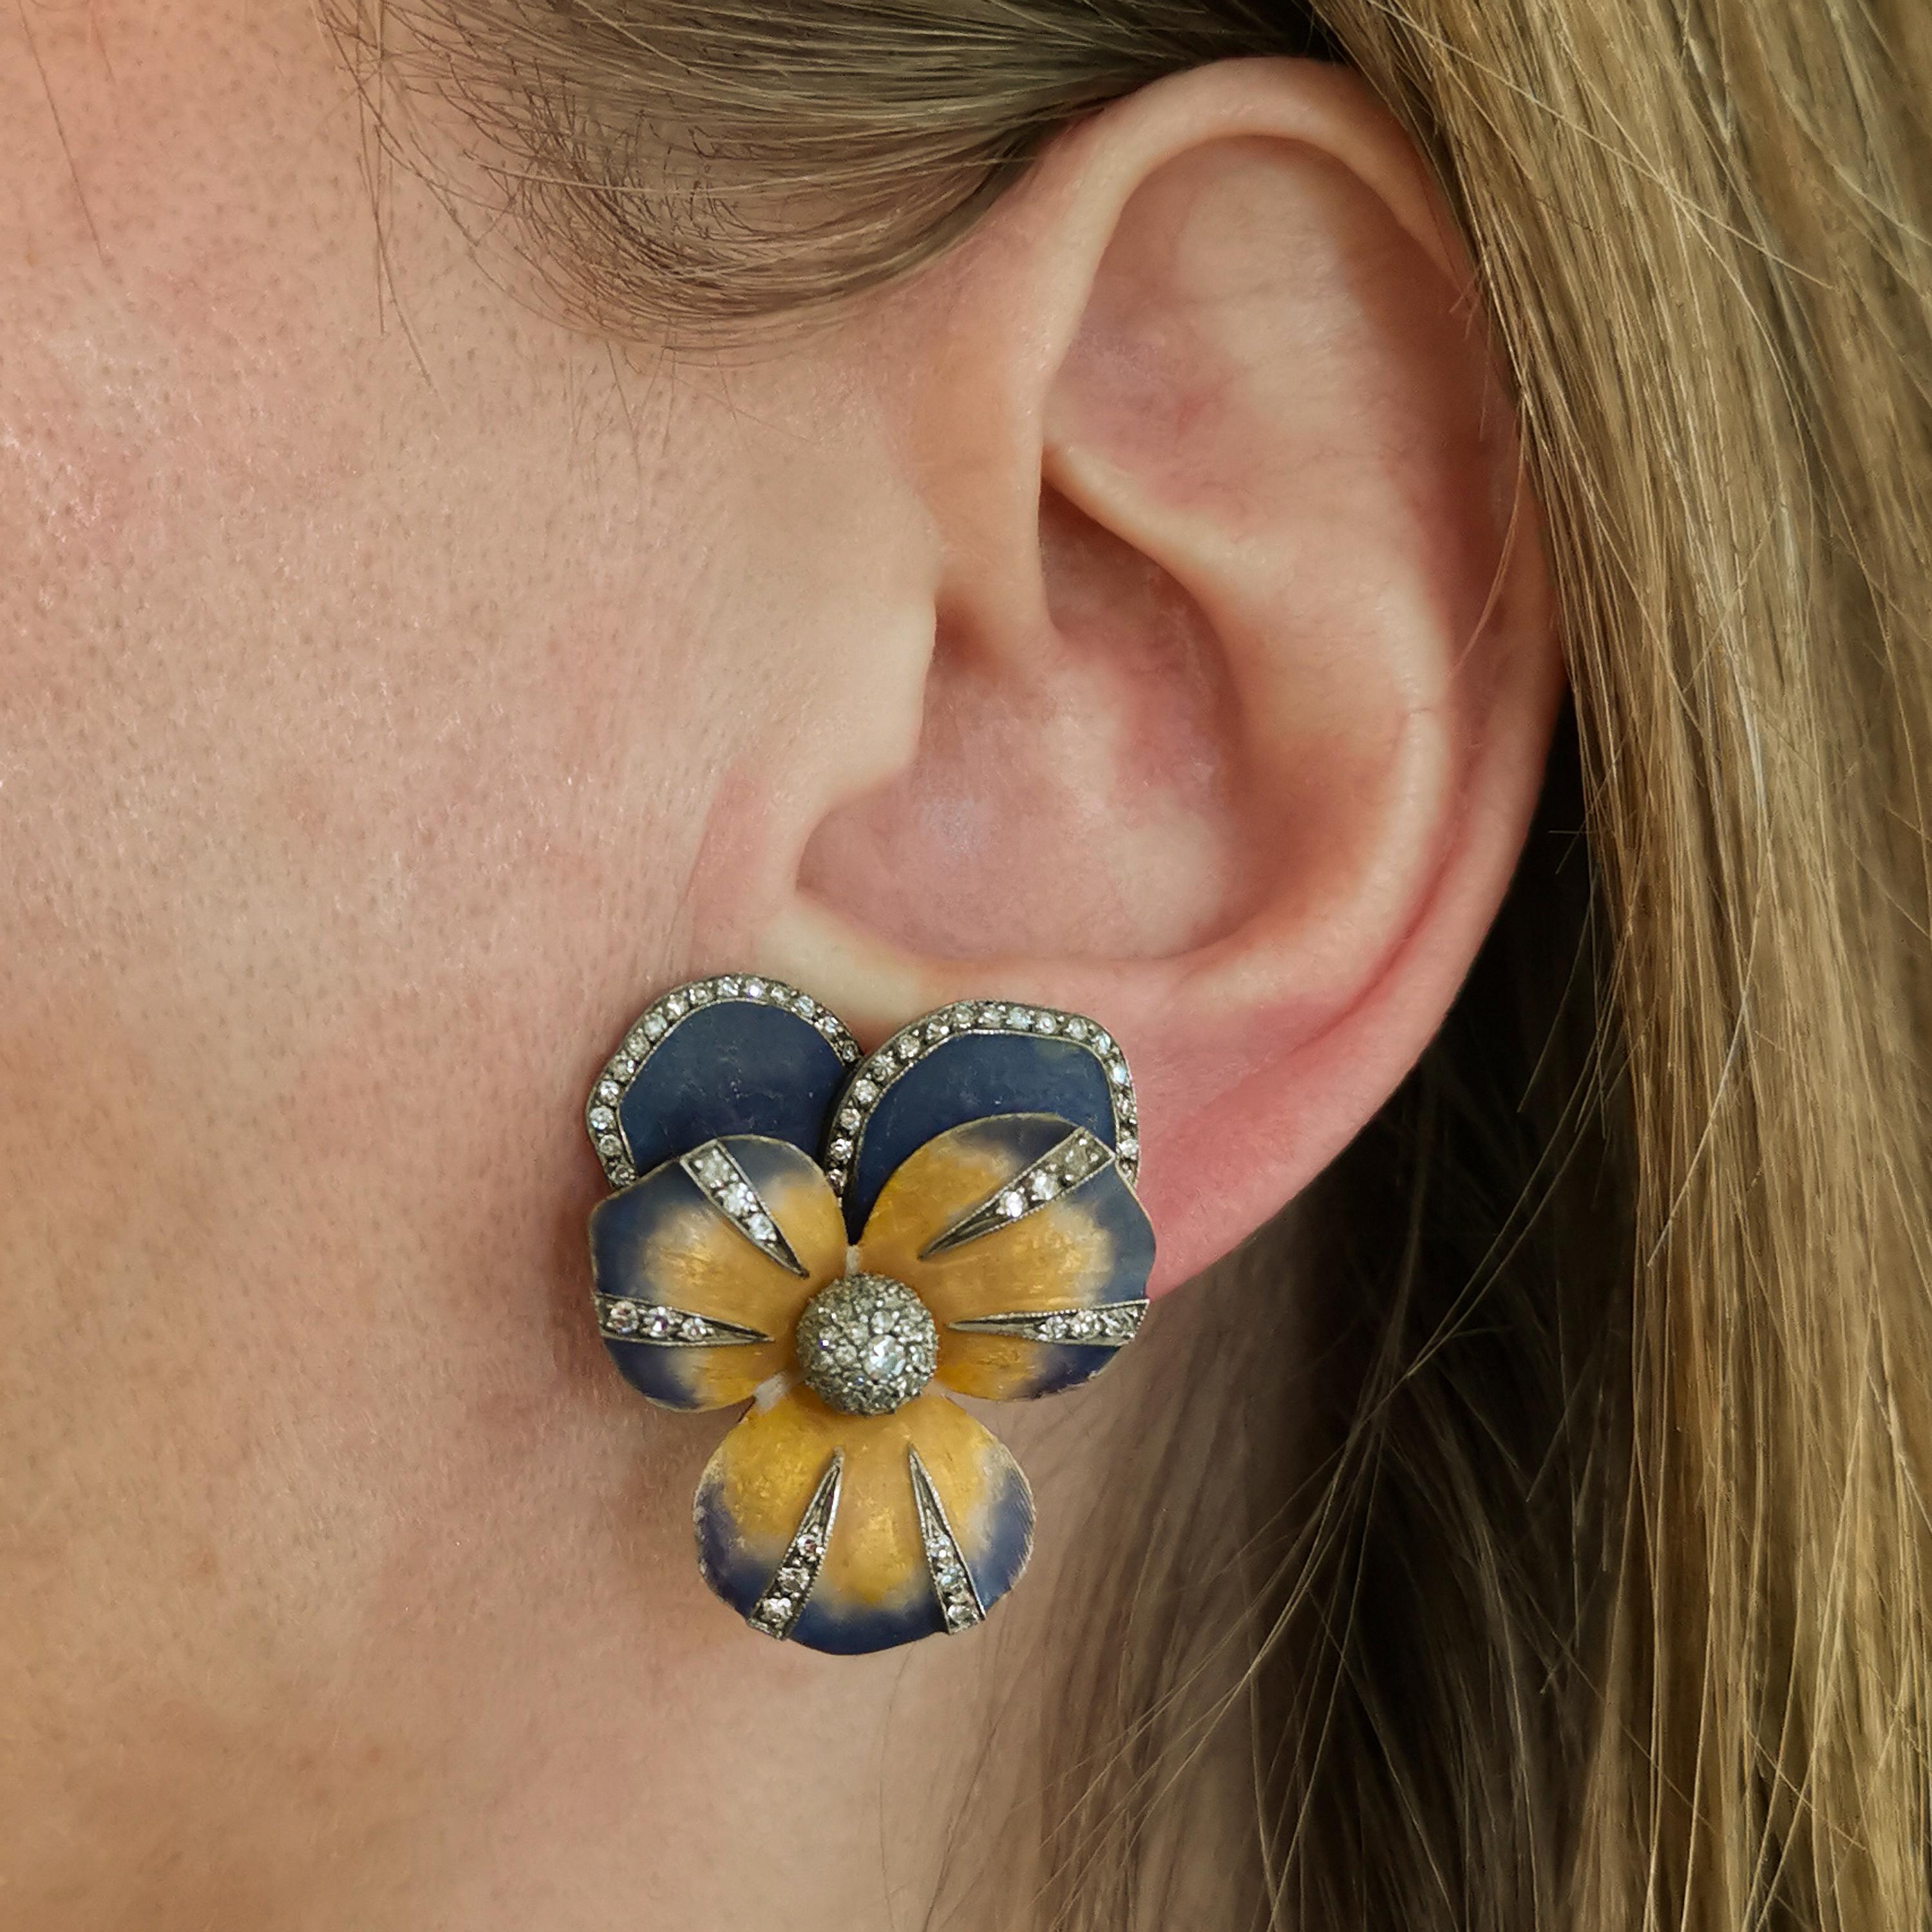 A pair of Moira pansy earrings, with purple and yellow matt basse-taille enamel, and pavé set eight-cut diamonds, mounted in gold with silver settings, signed Moira and numbered. With collapsible posts and clip fittings.

Moira's eponymous